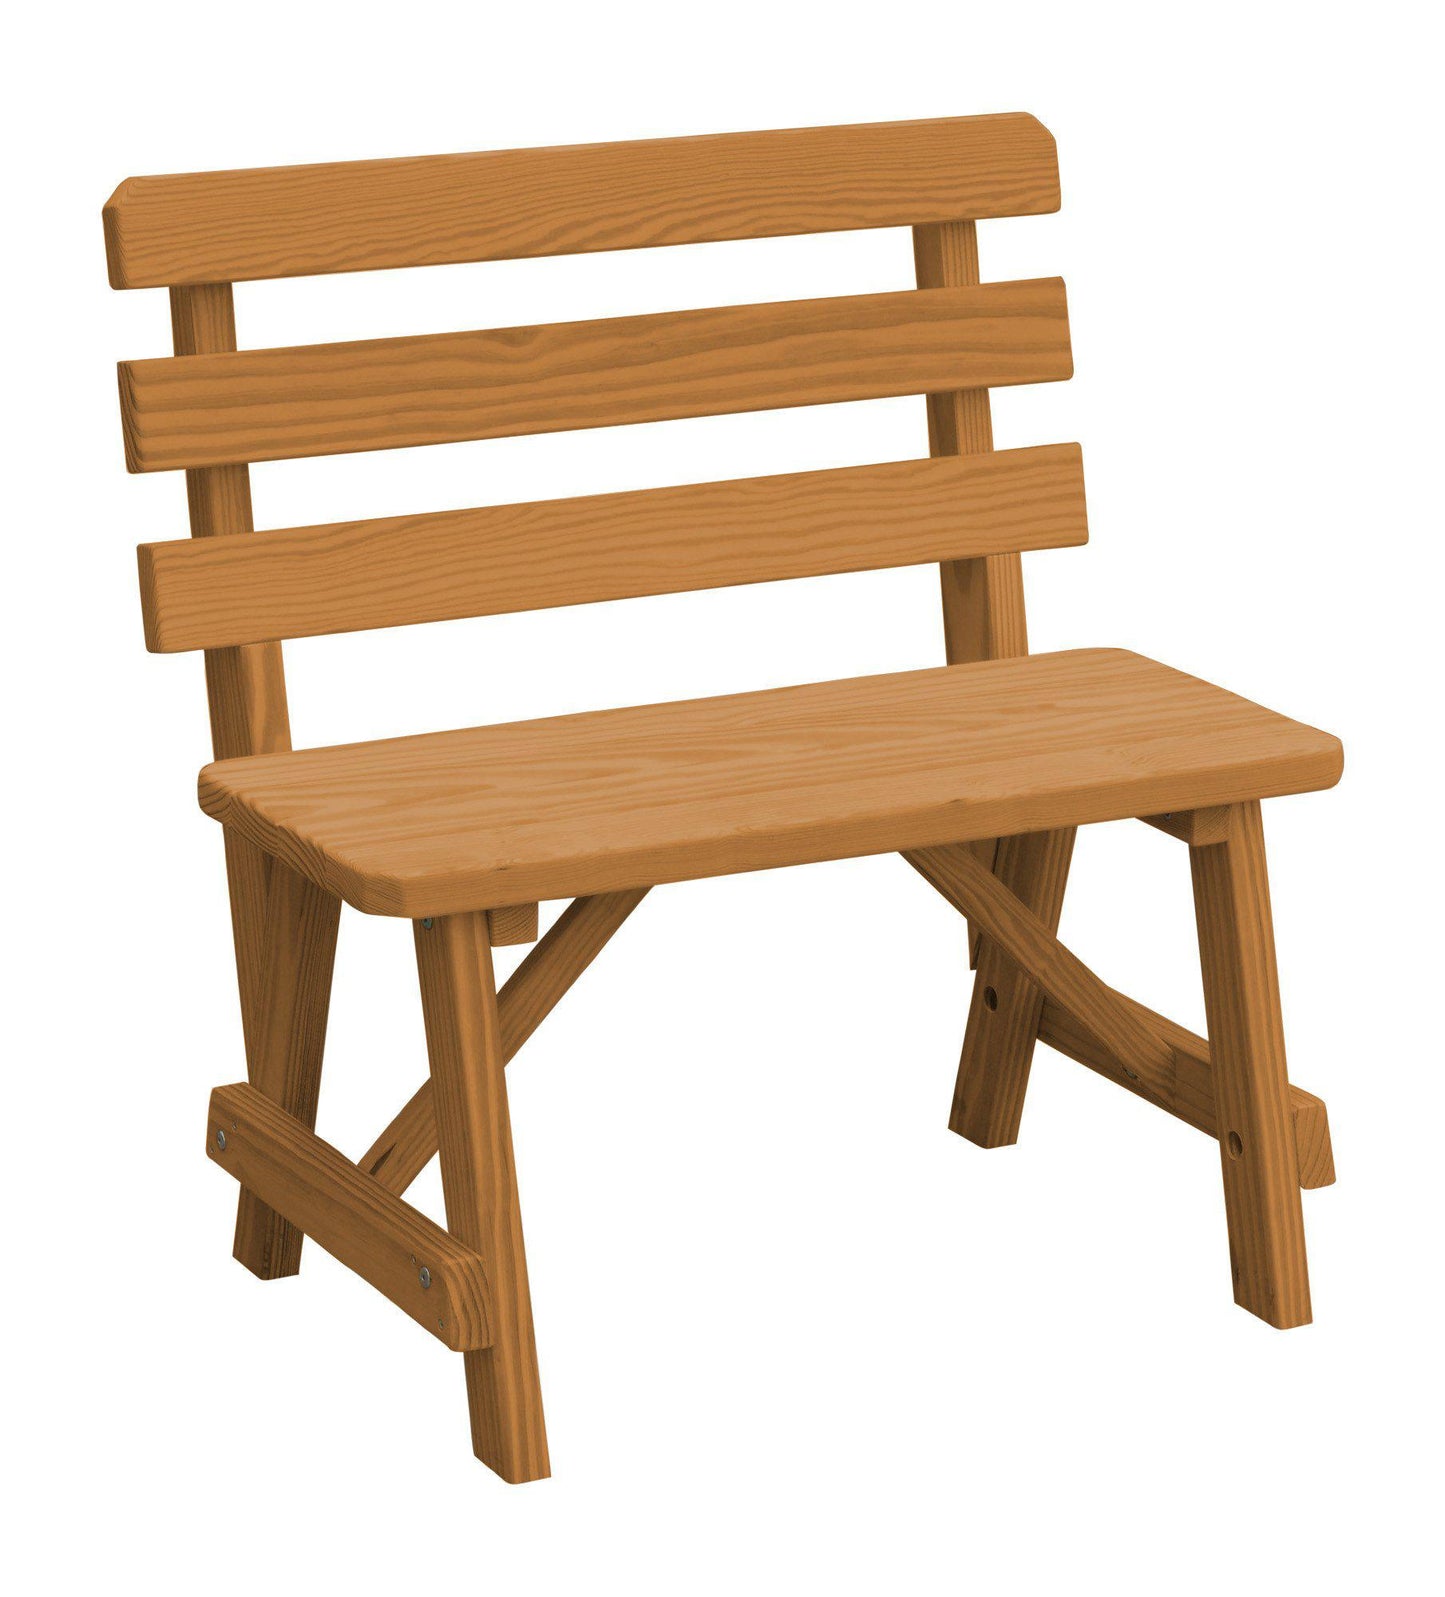 A&L Furniture Co. Yellow Pine 33" Traditional Backed Bench Only - LEAD TIME TO SHIP 10 BUSINESS DAYS